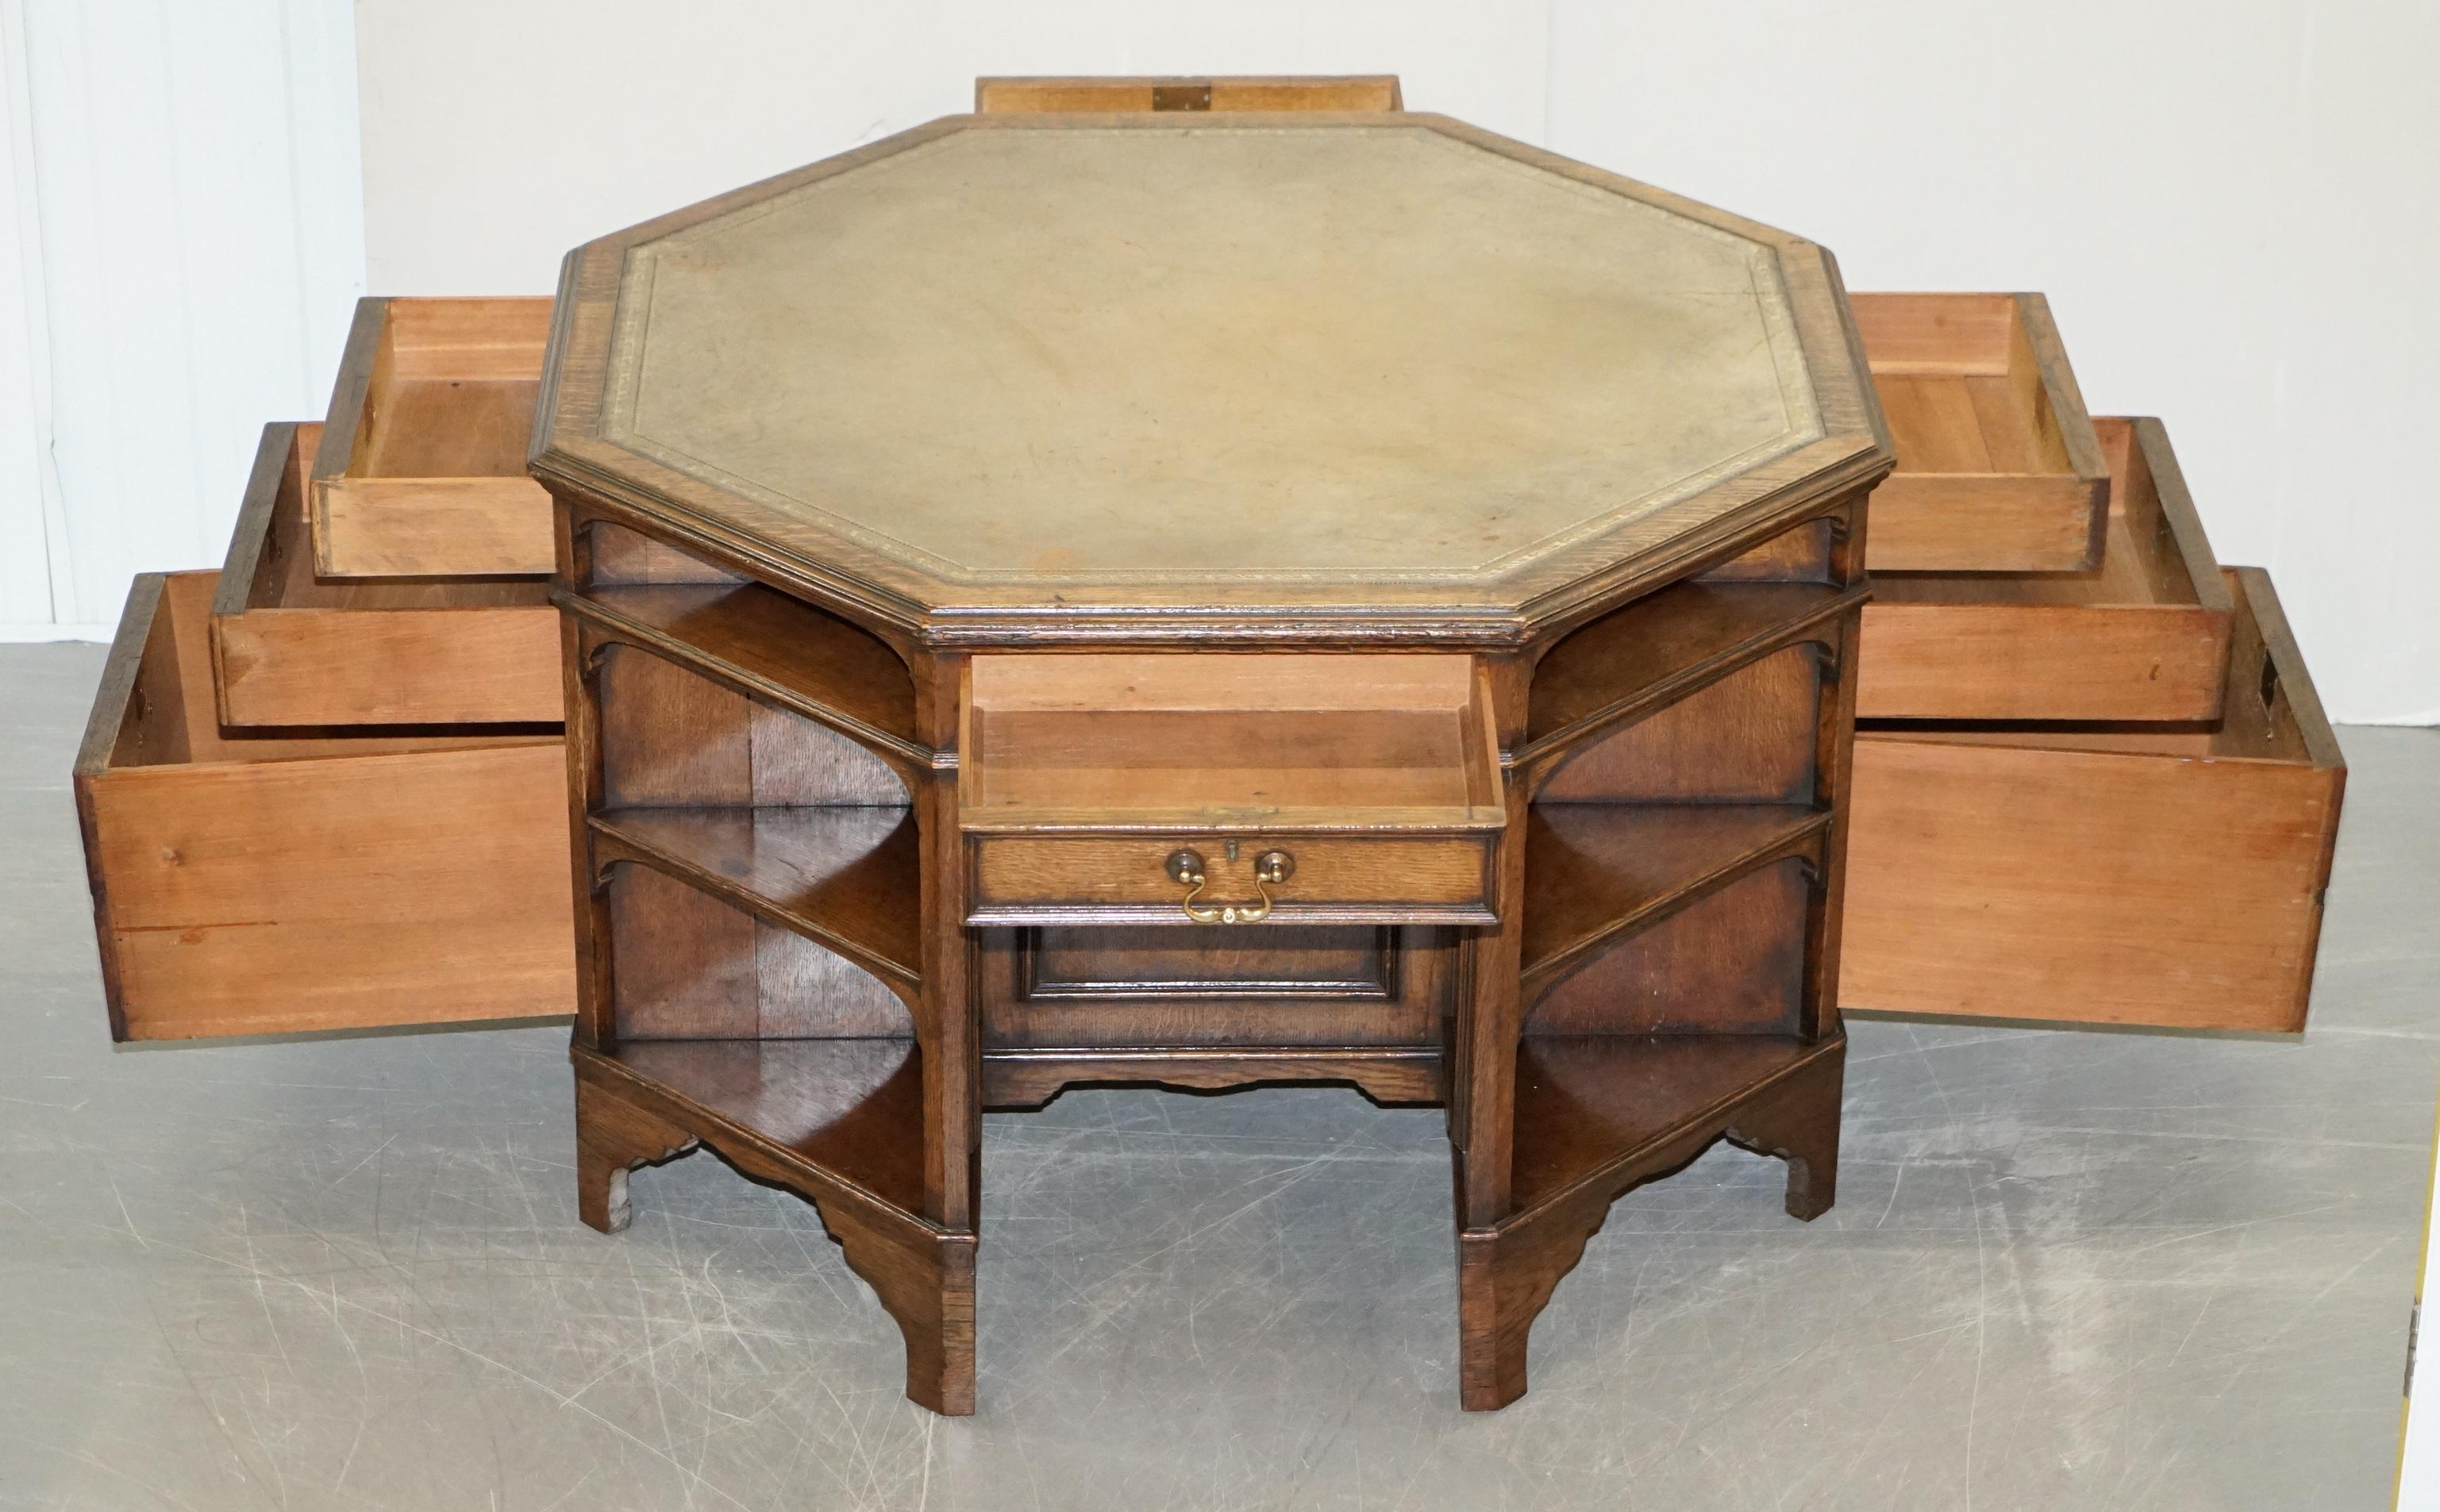 Harrods Antique English Library Two Person Octagonal Partner Desk Inc Bookcases 3